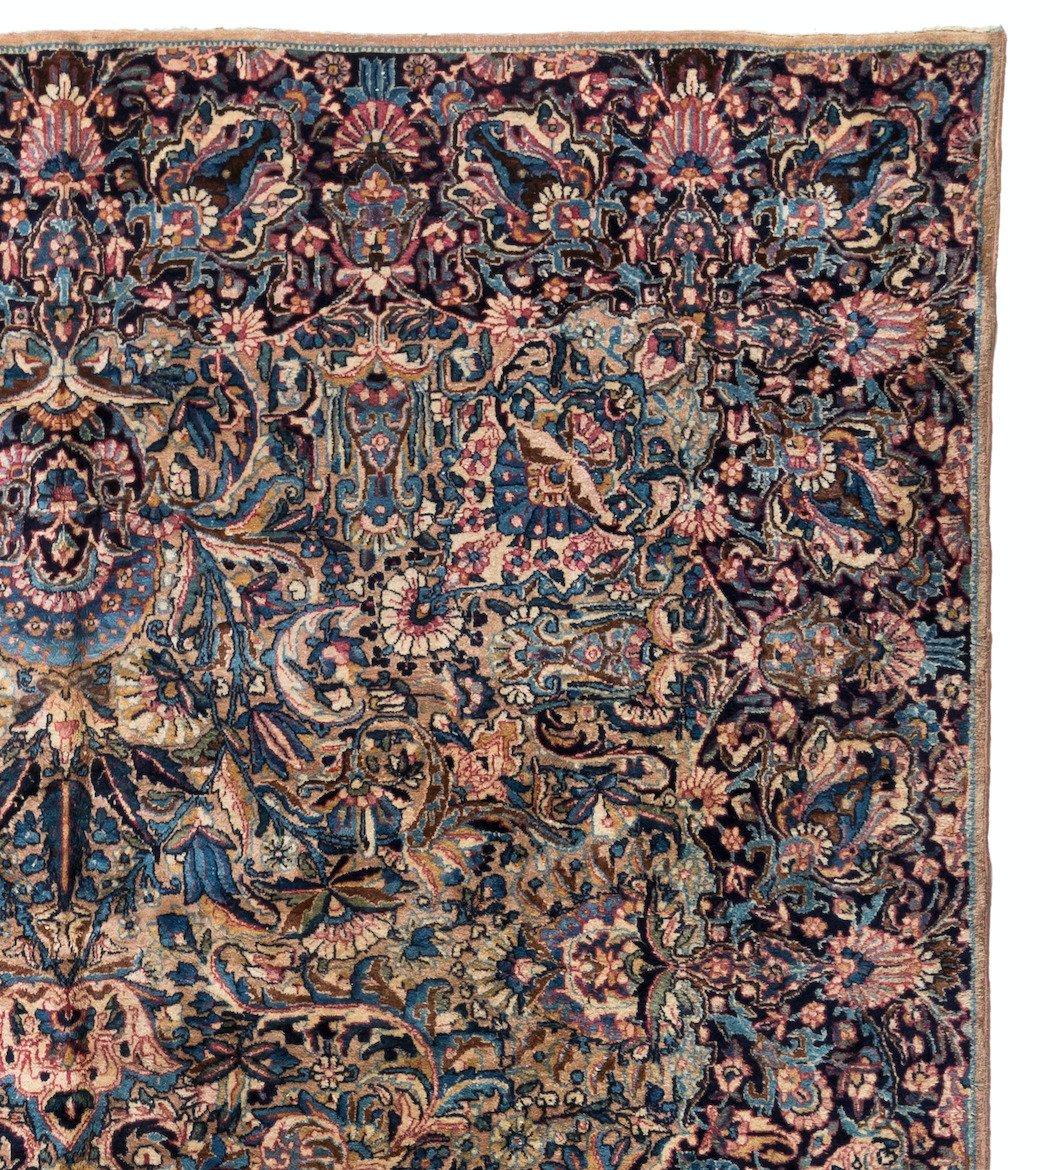 Hand-Knotted Antique Persian Blue and Ivory Floral Kirman Rug circa 1930-1940s